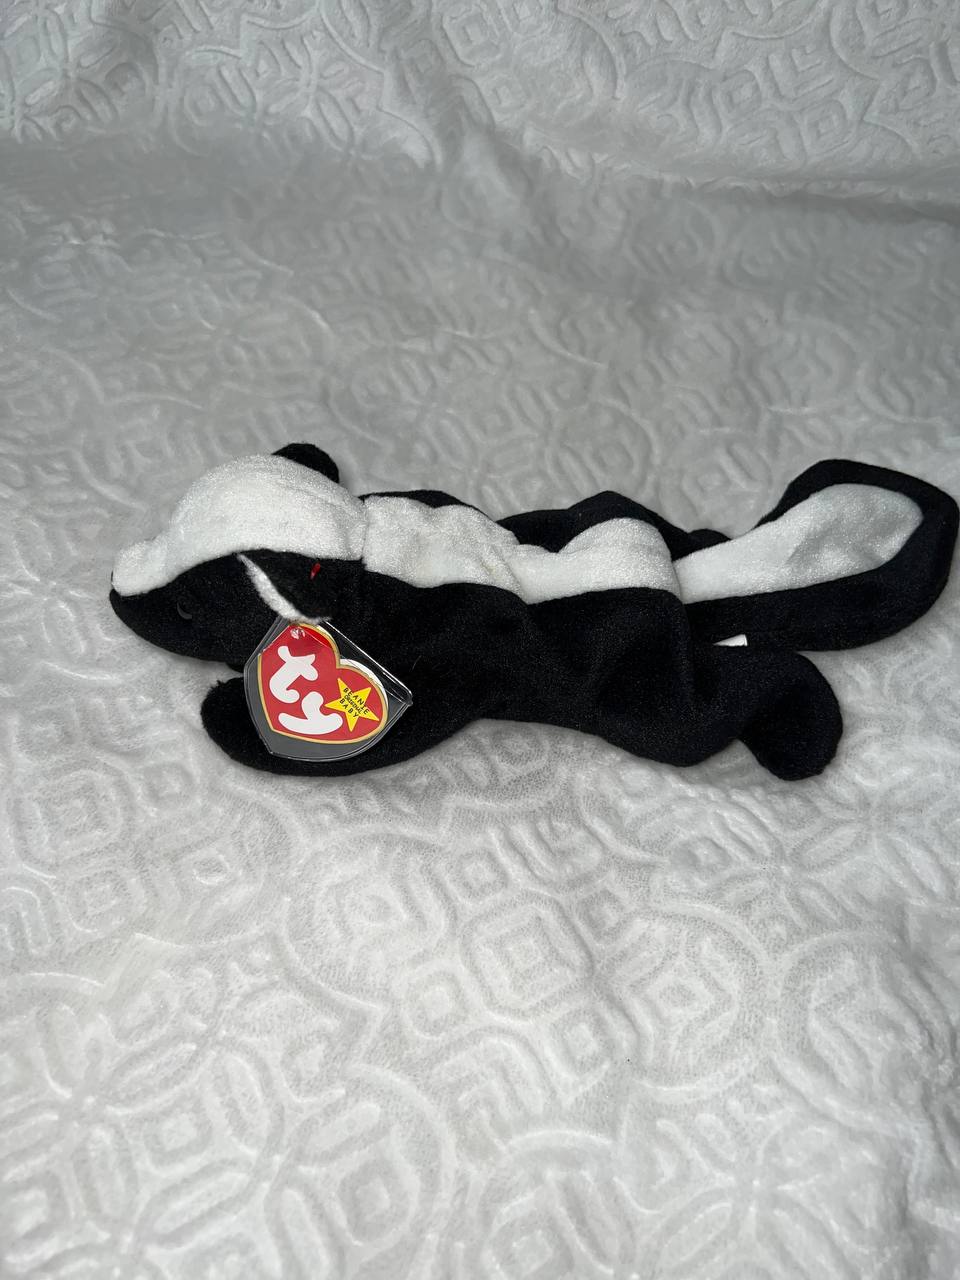 *RARE* MINT Stinky Beanie Baby 1995 With Tag